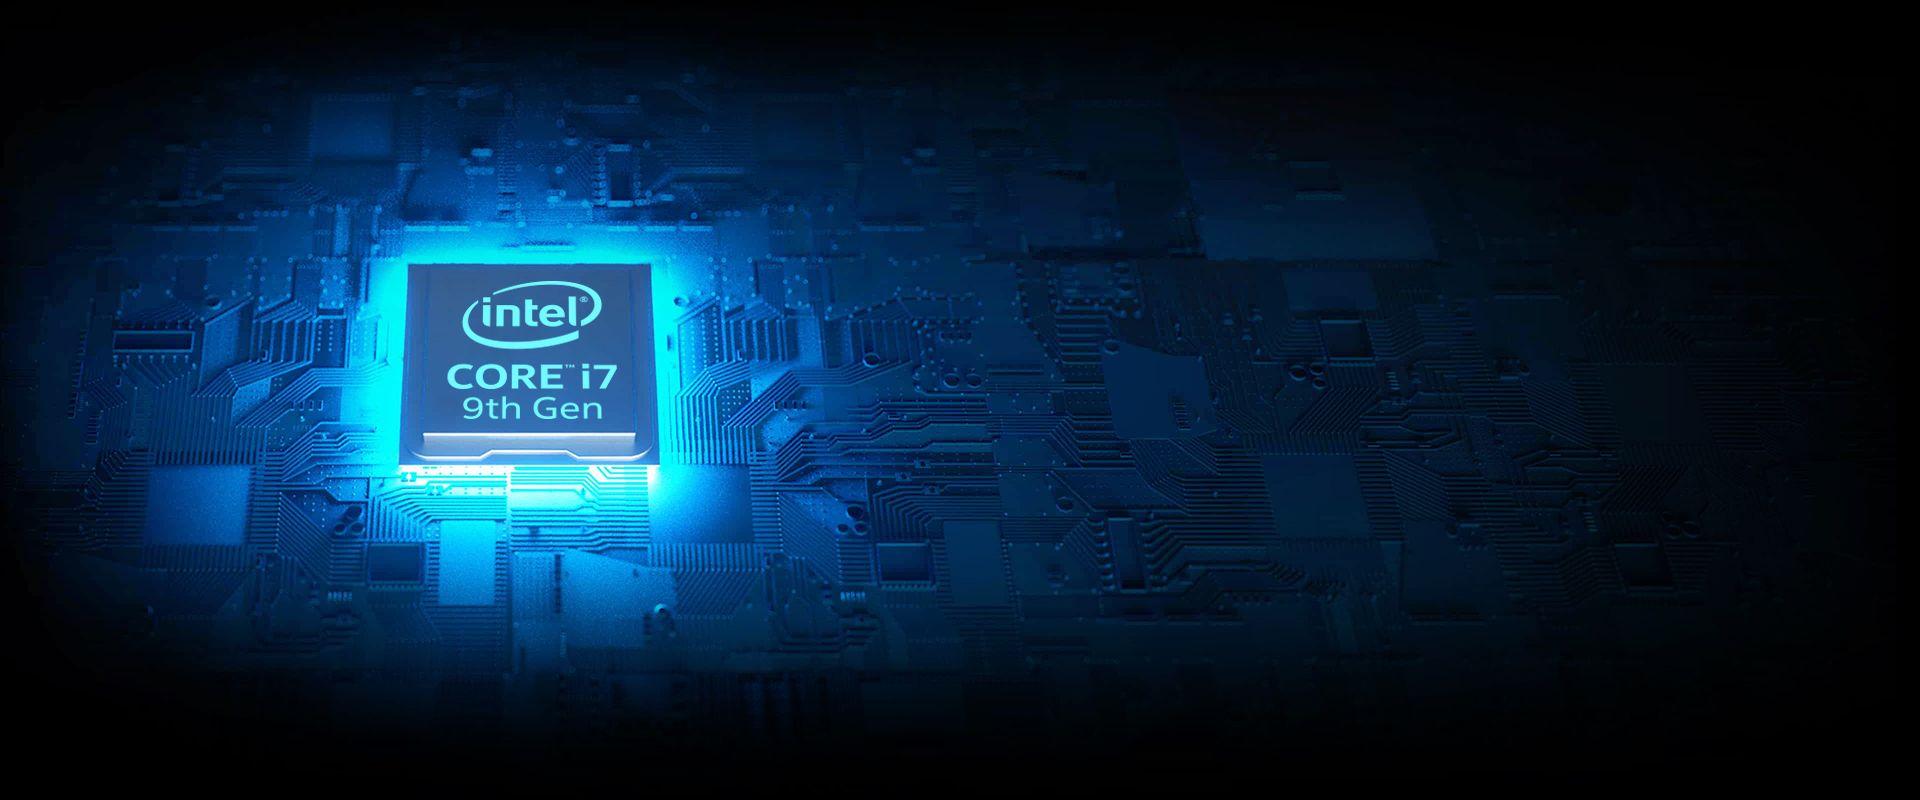 Intel I7 Wallpapers Top Free Intel I7 Backgrounds Wallpaperaccess 5565